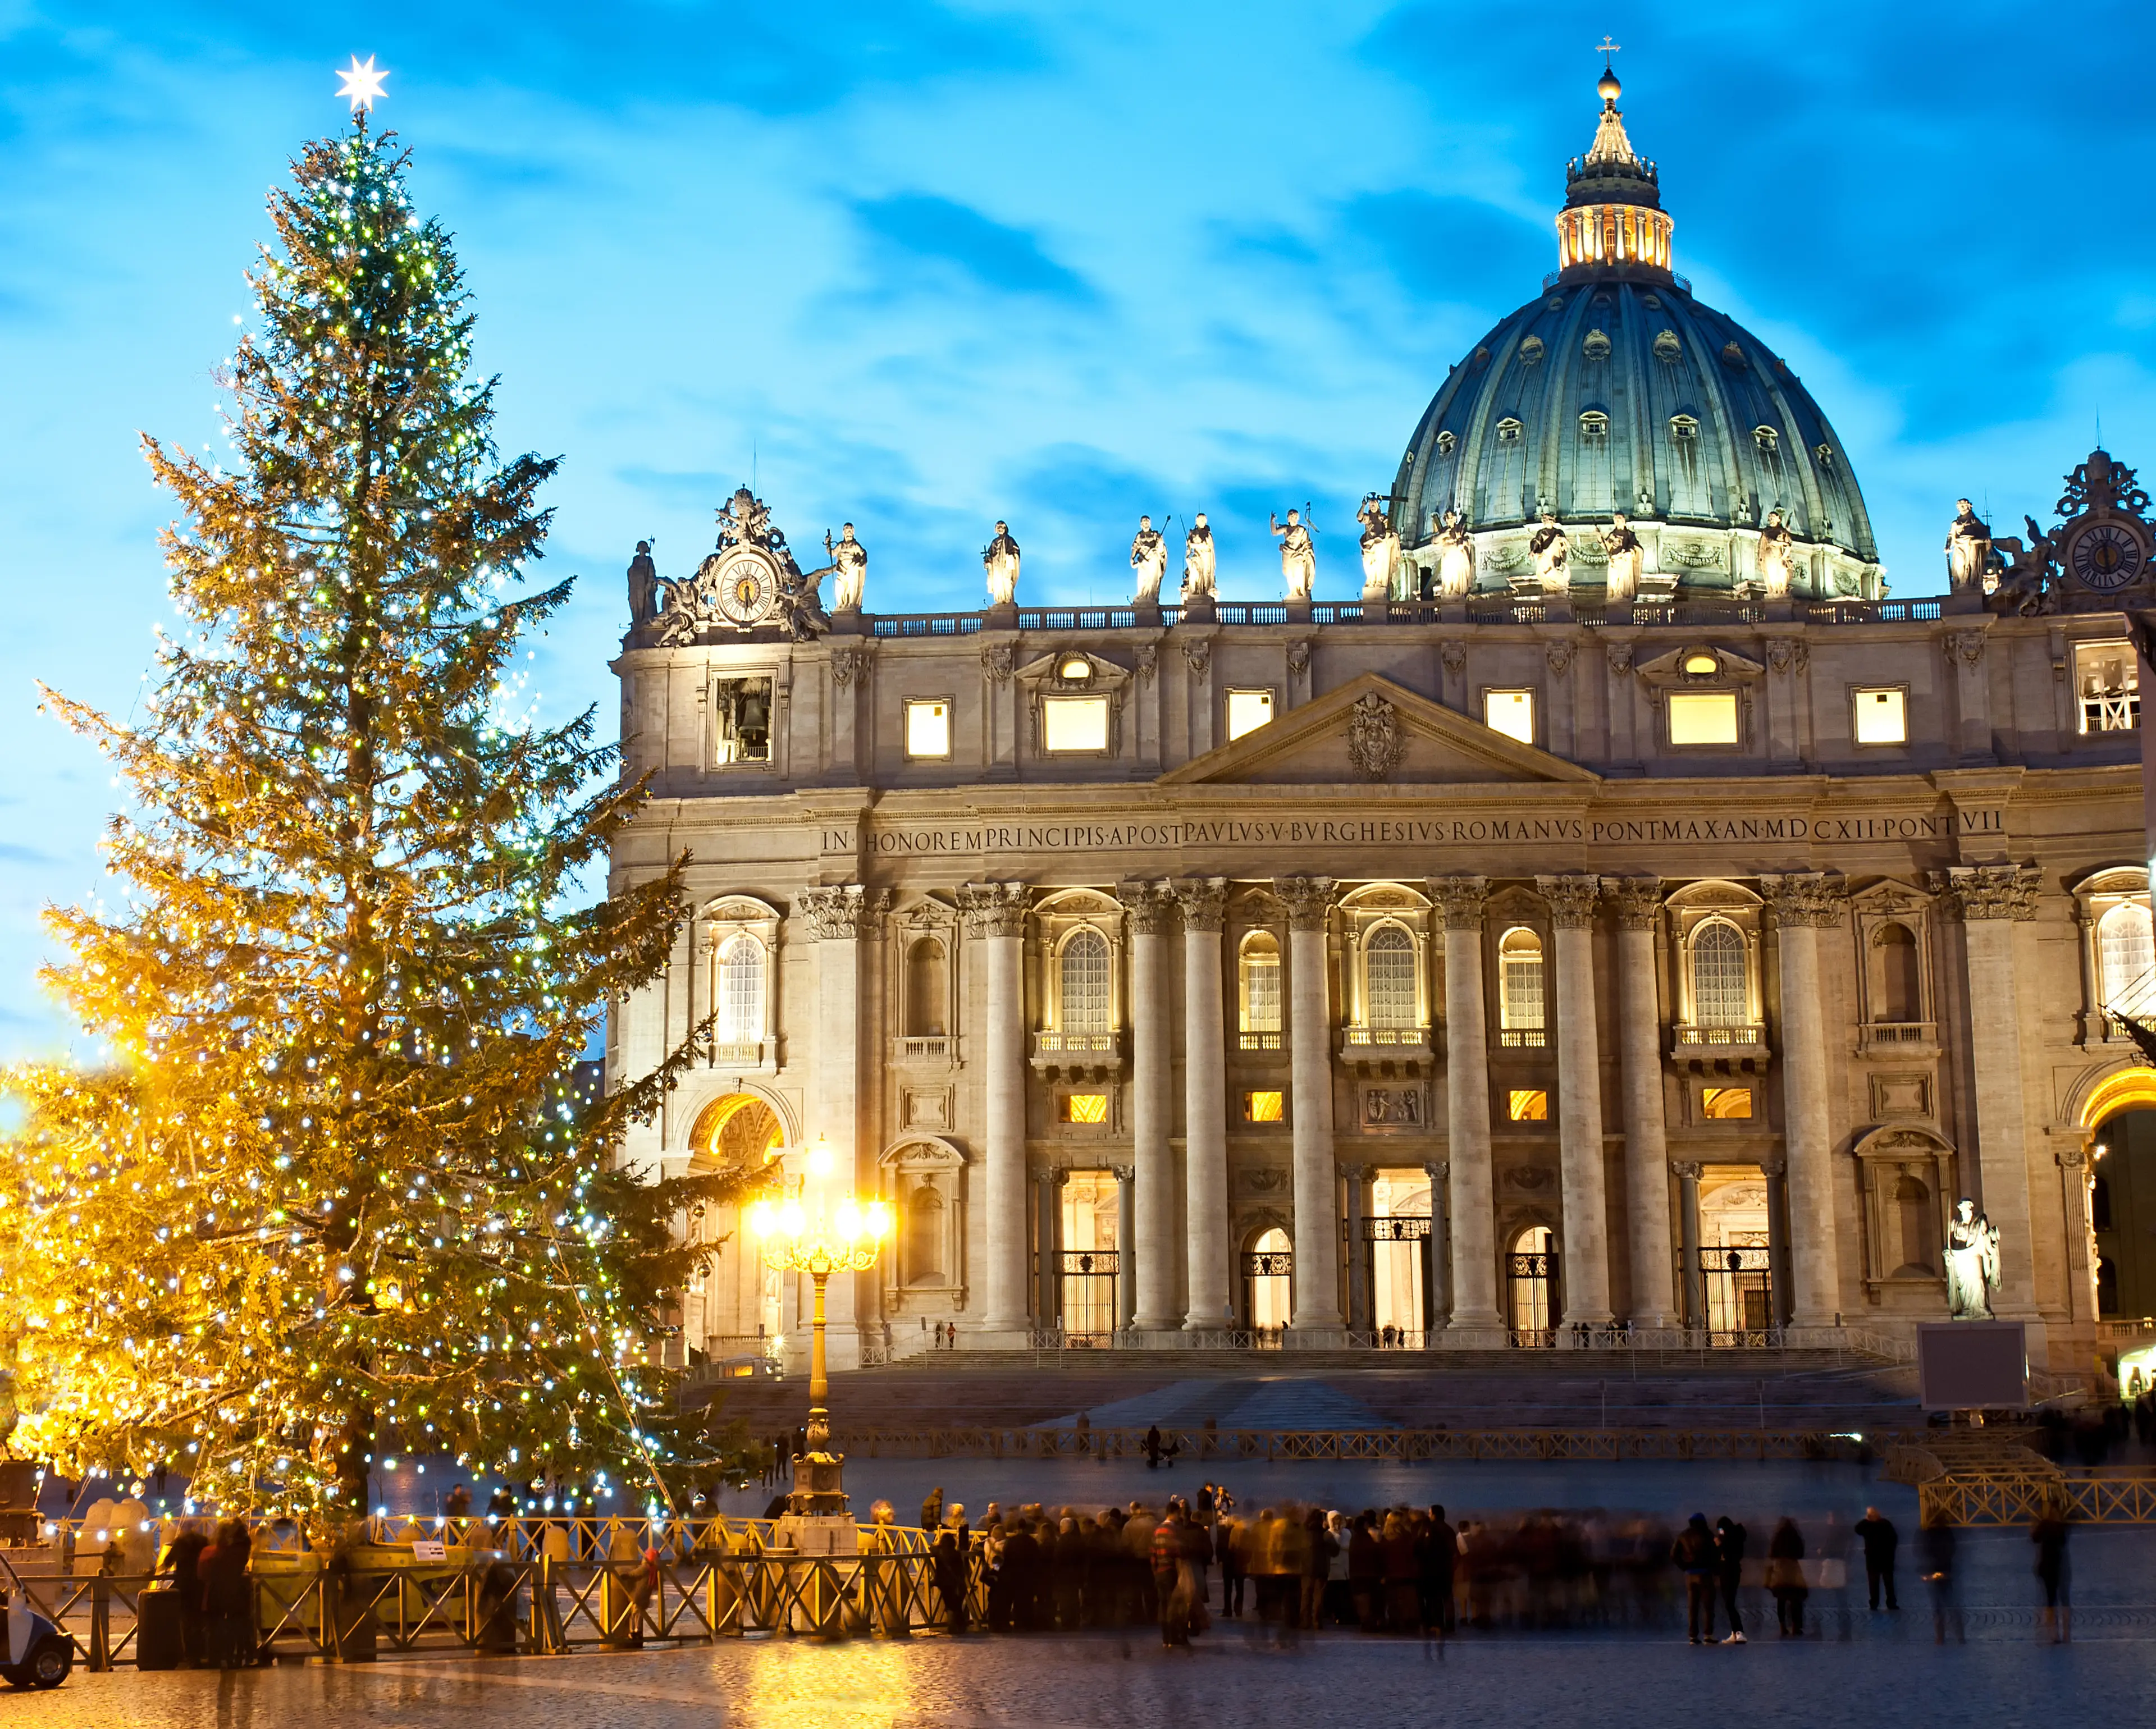 5-Day Christmas Holiday Itinerary for Couples in Rome, Italy